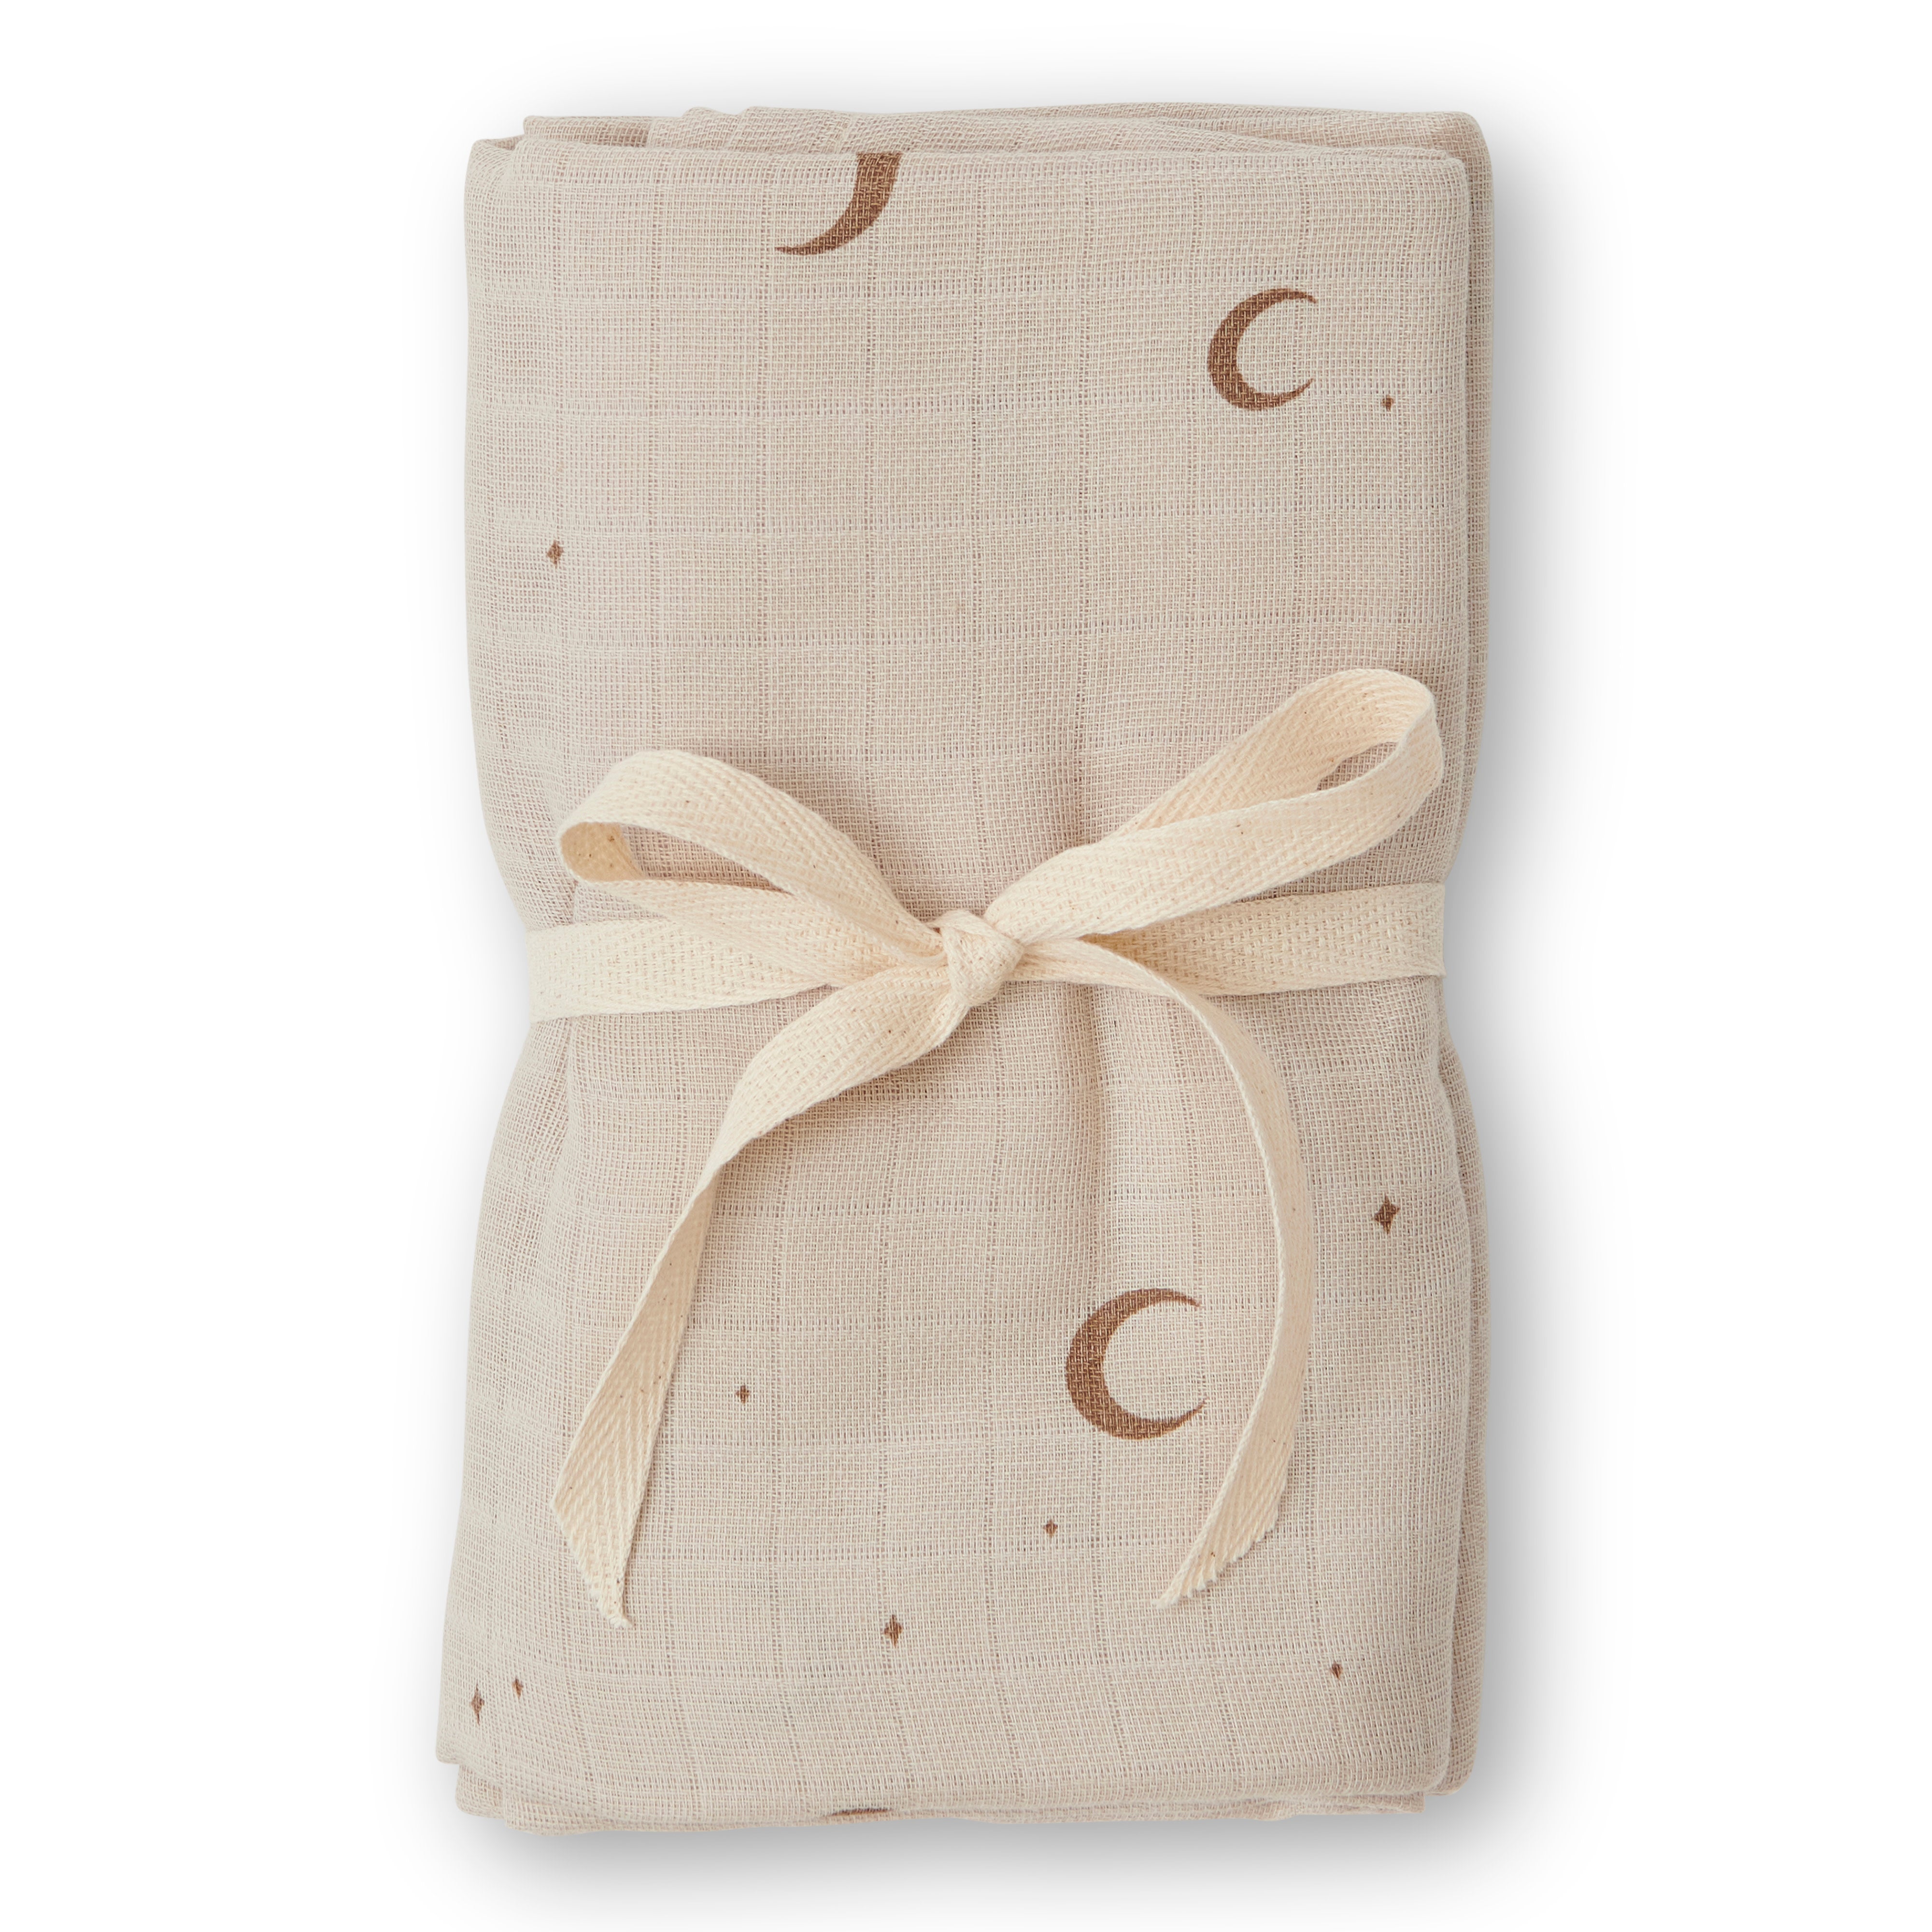 That's Mine - Muslin swaddle - Multiple colours Calm moon - Hola BB